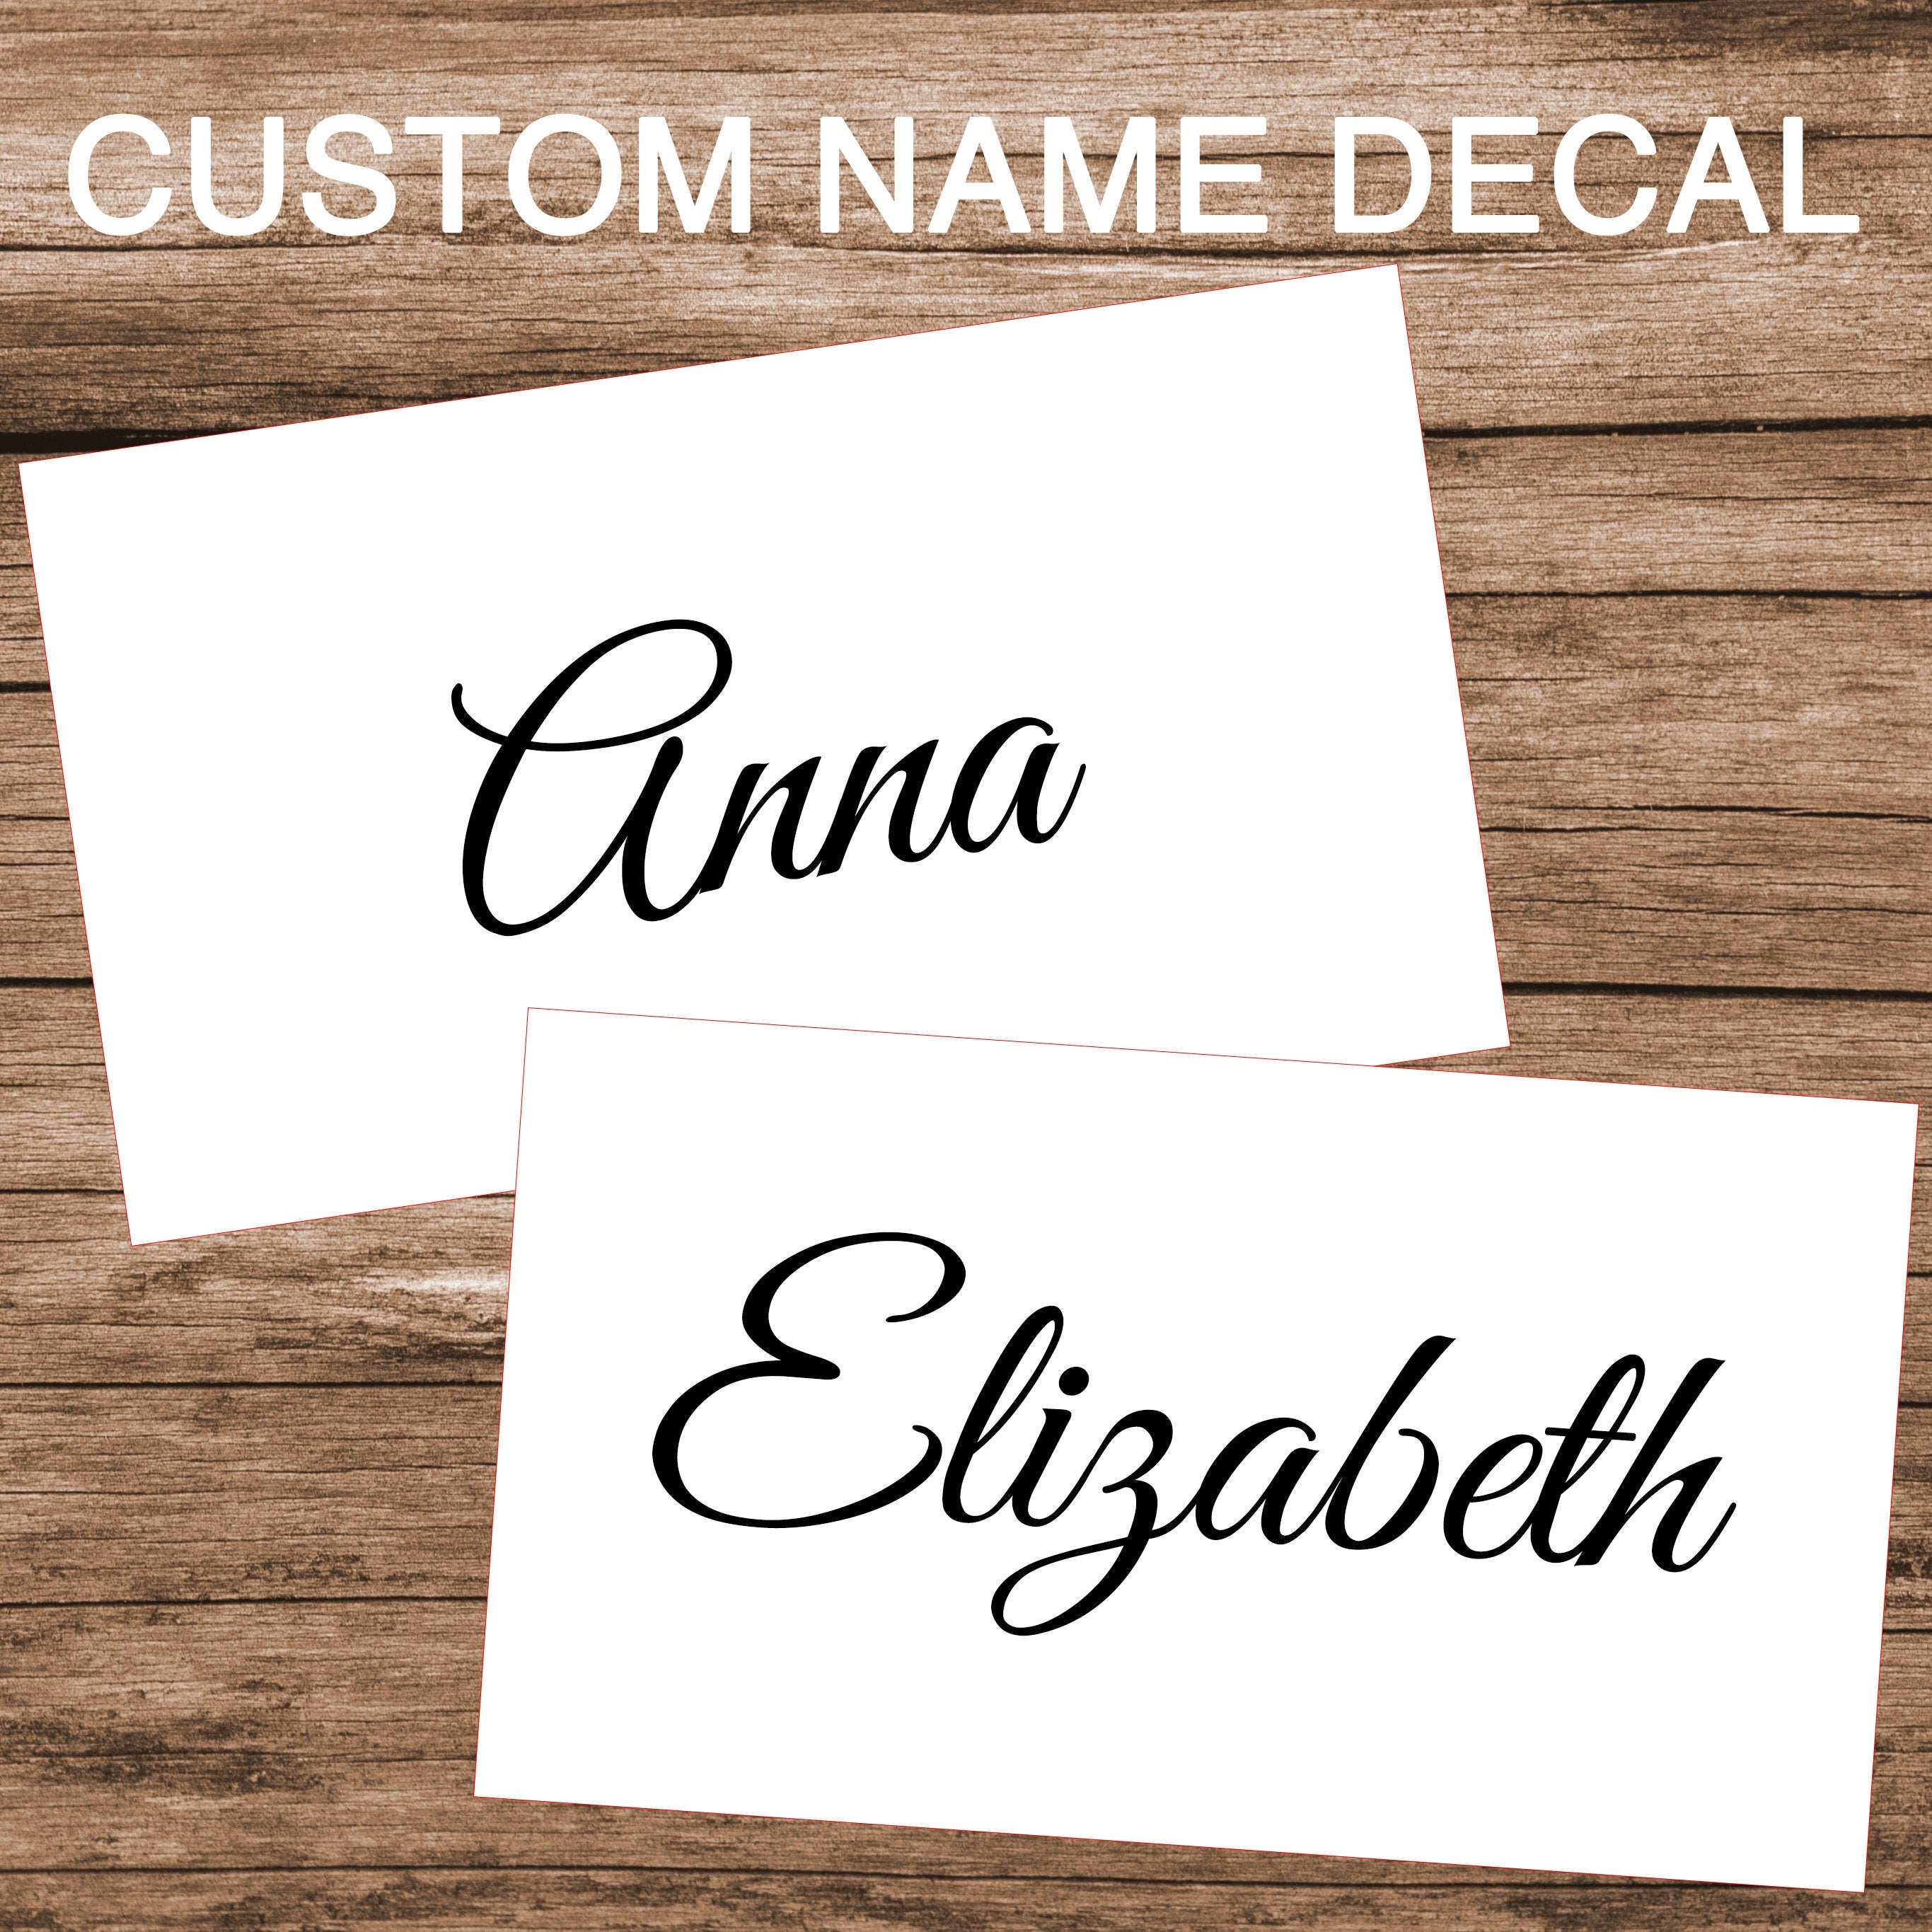 One Pair Custom Name Decals - Vinyl Name Sticker for Smooth, Hard Surfaces Like Tumblers, Laptops, and More!